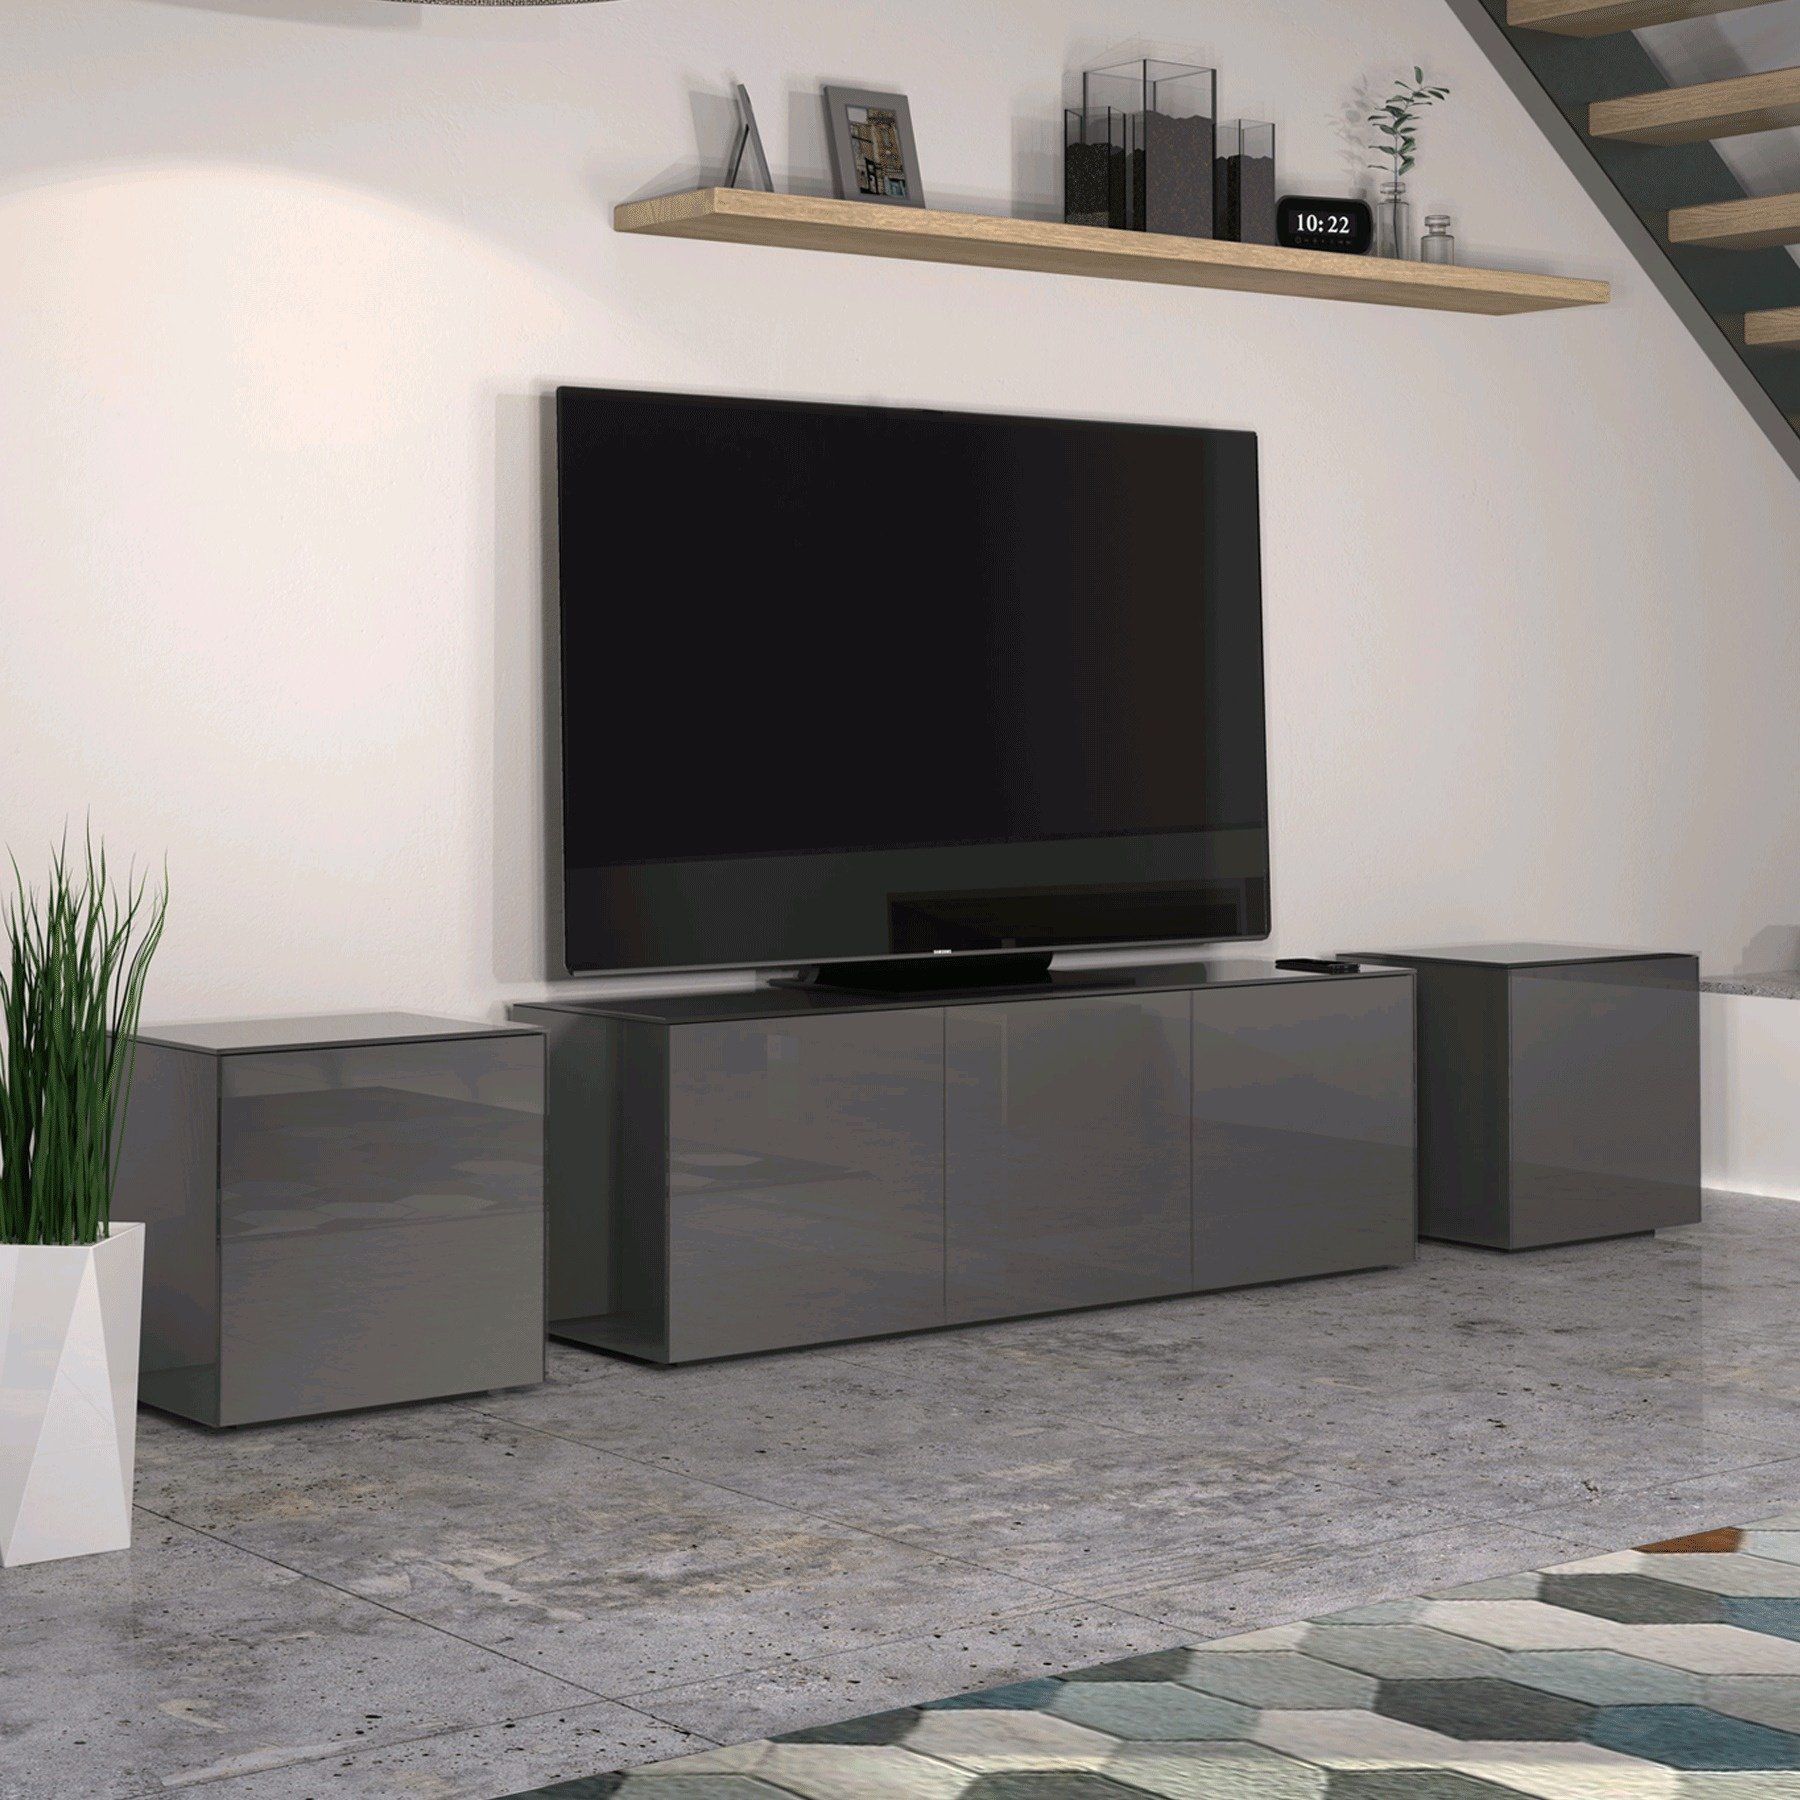 Invictus Grey High Gloss Tv Stand For Up To 70" Tvs With Regard To High Gloss Tv Cabinets (View 2 of 15)